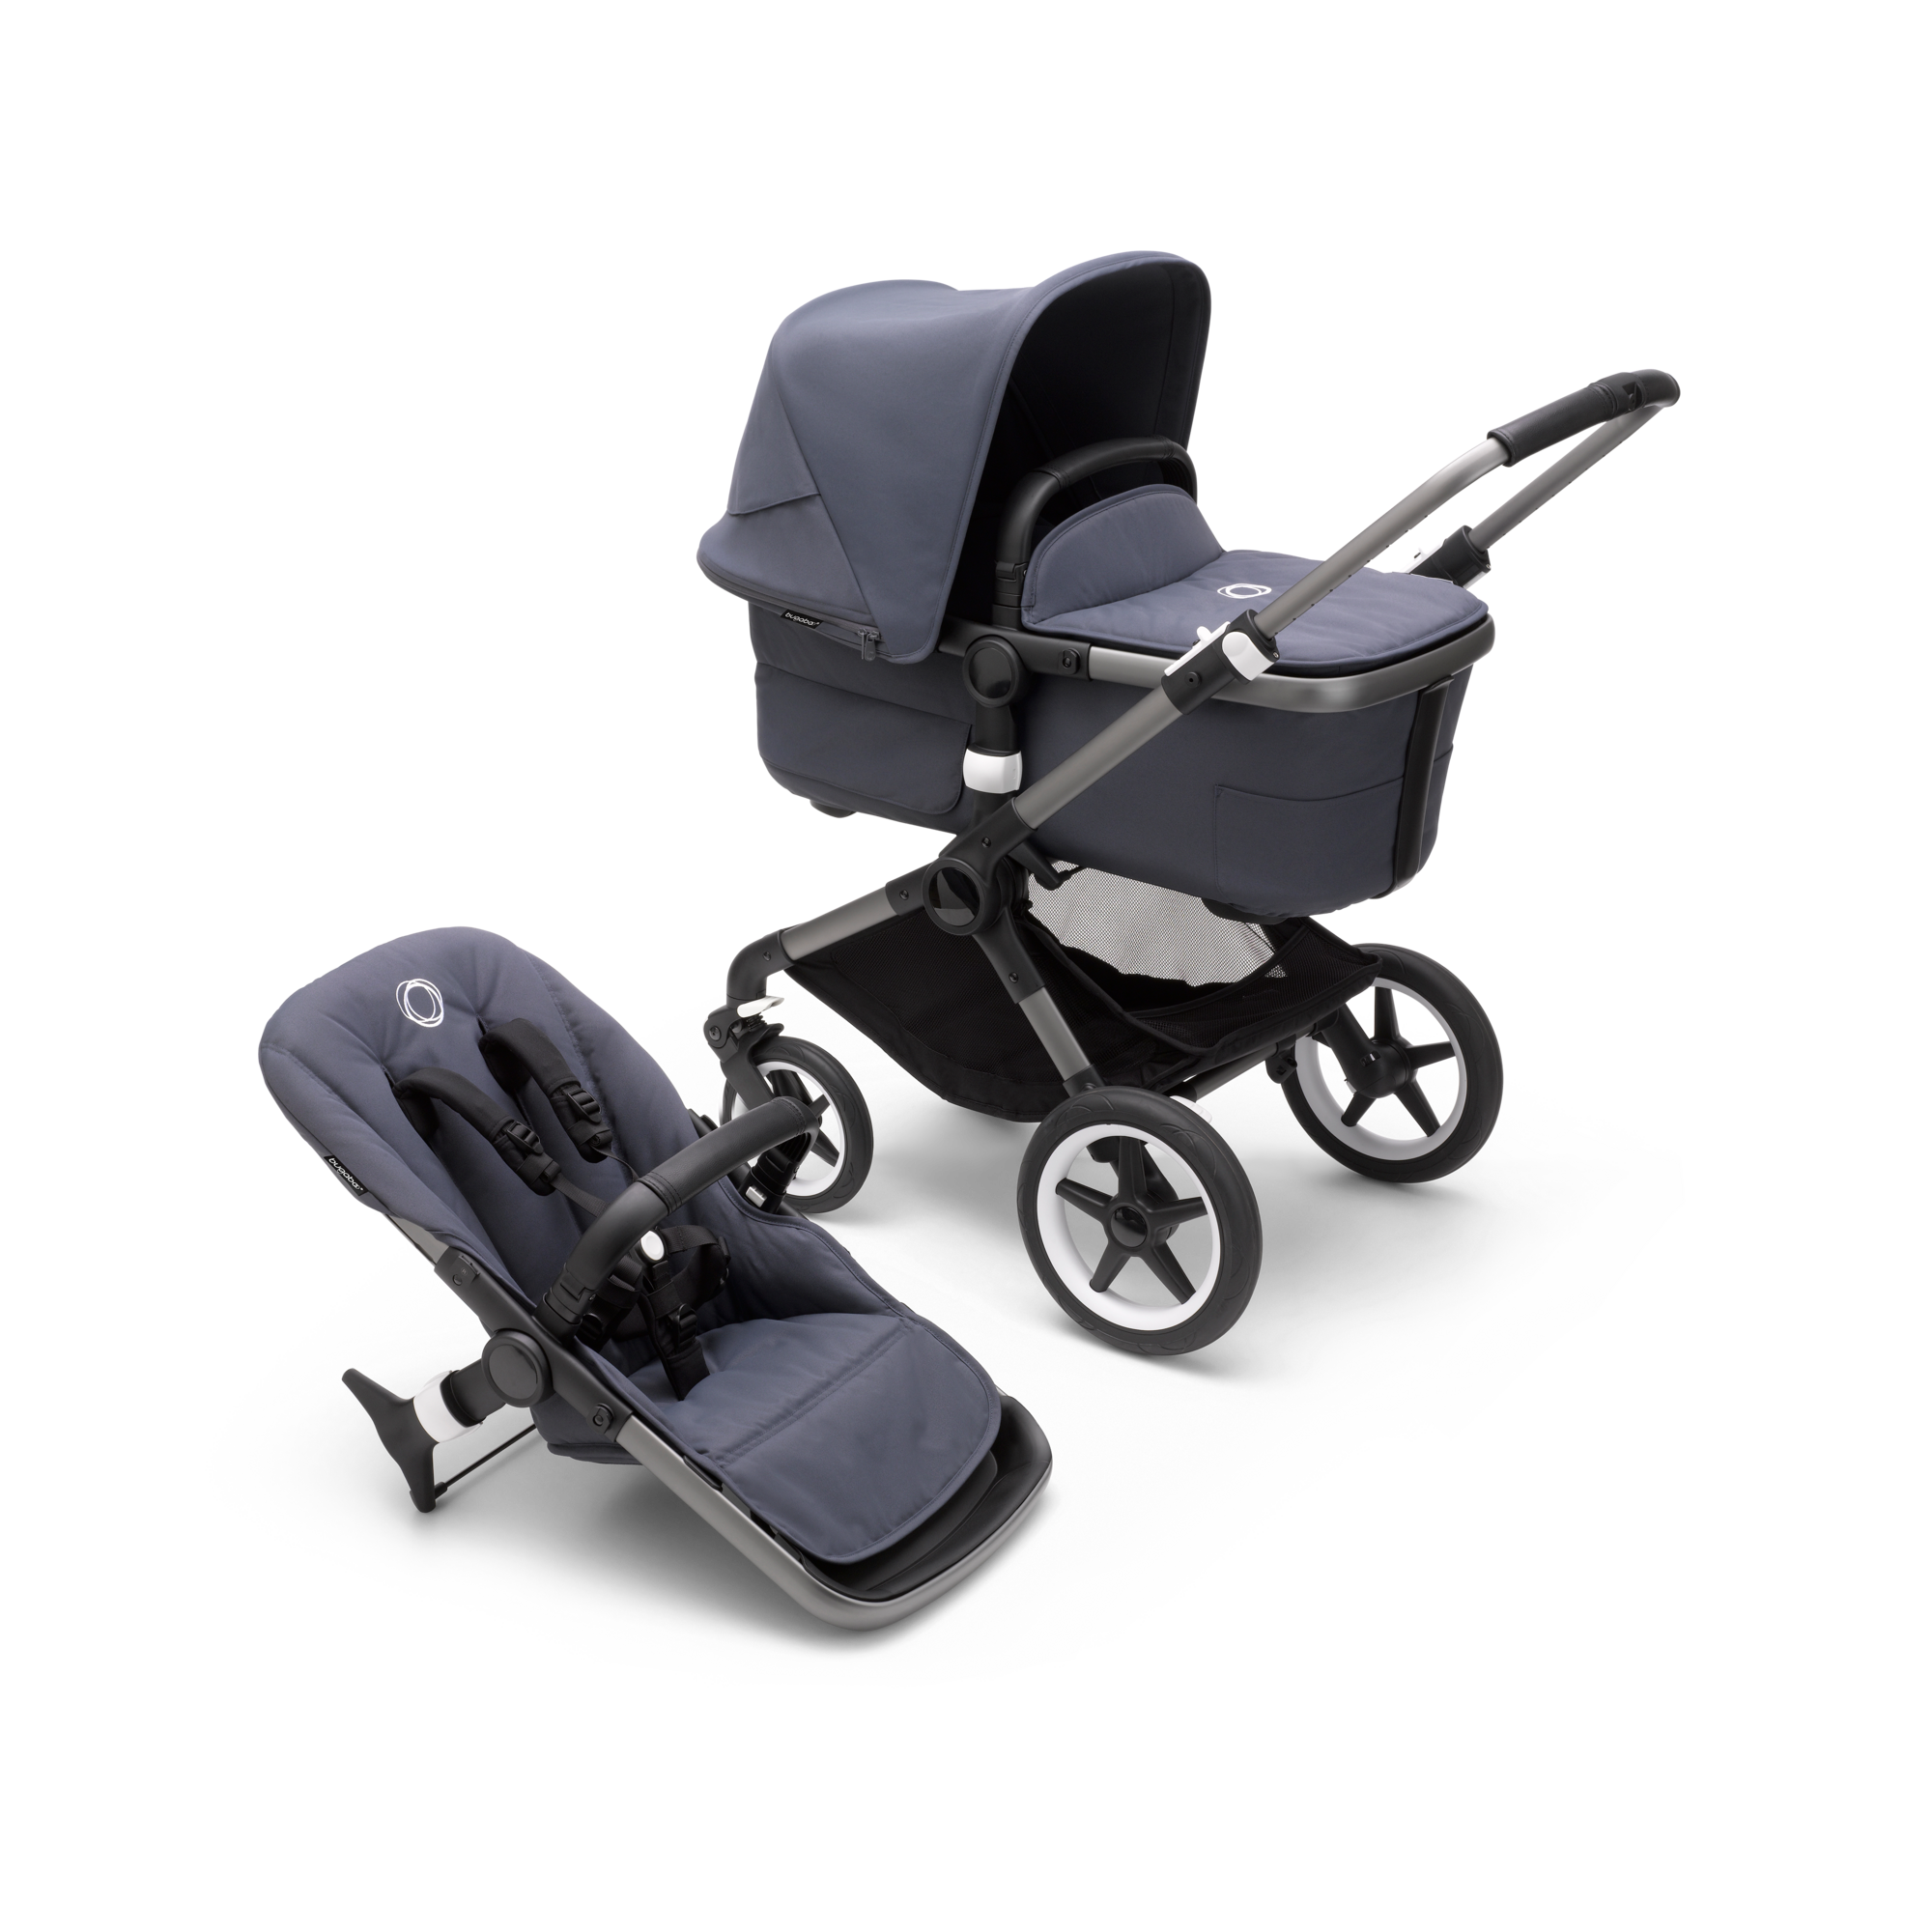 Fox 3 carrycot and seat pushchair